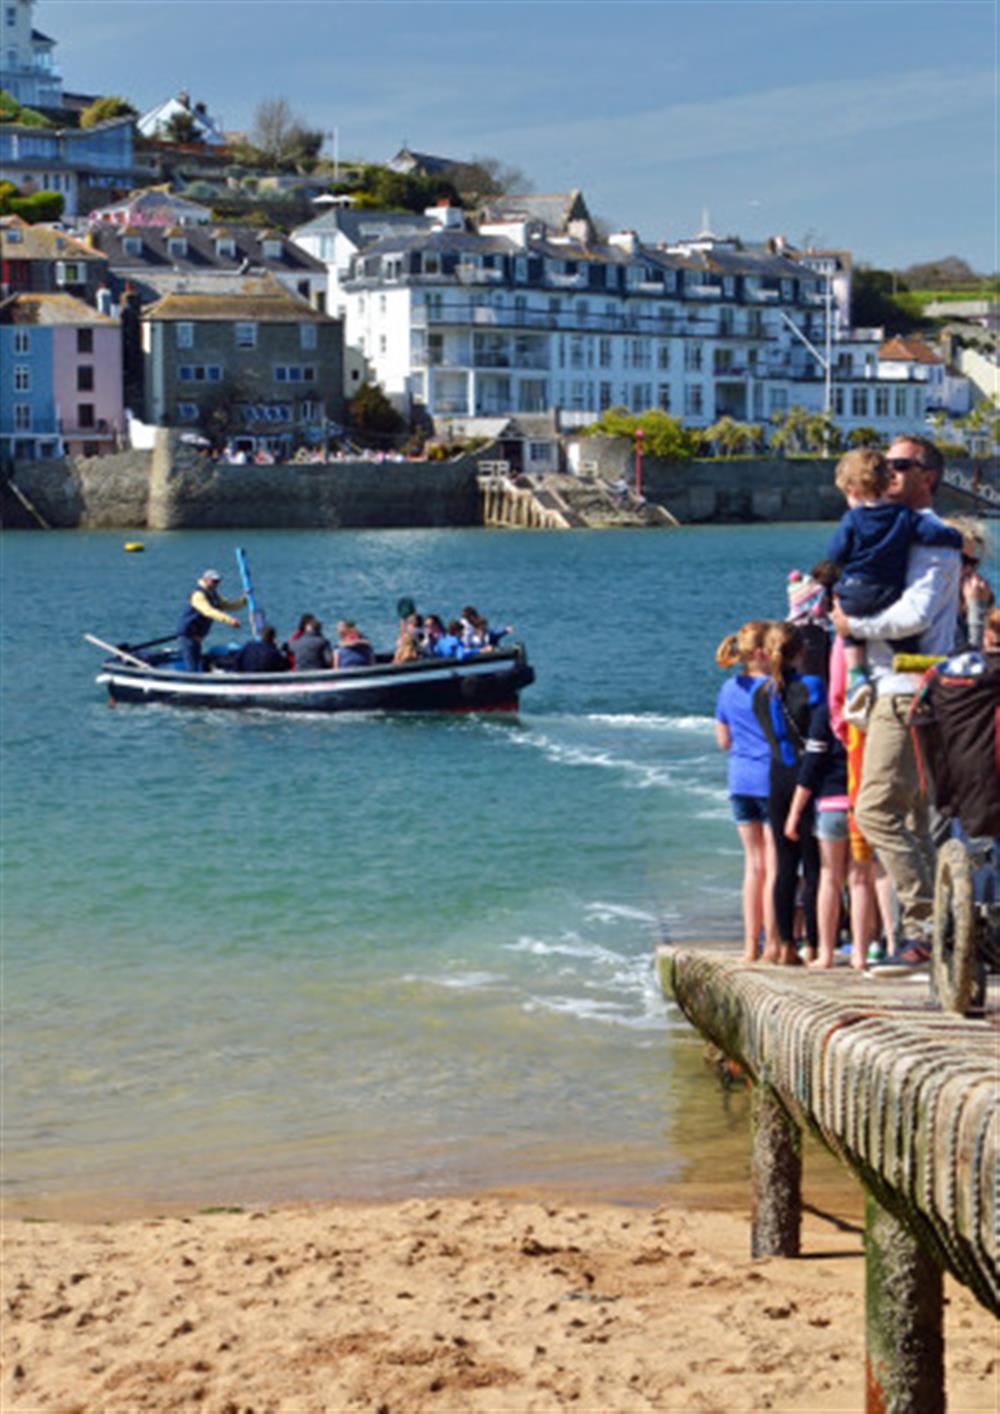 The foot ferry to Salcombe is less than a mile away. at Holset House in East Portlemouth